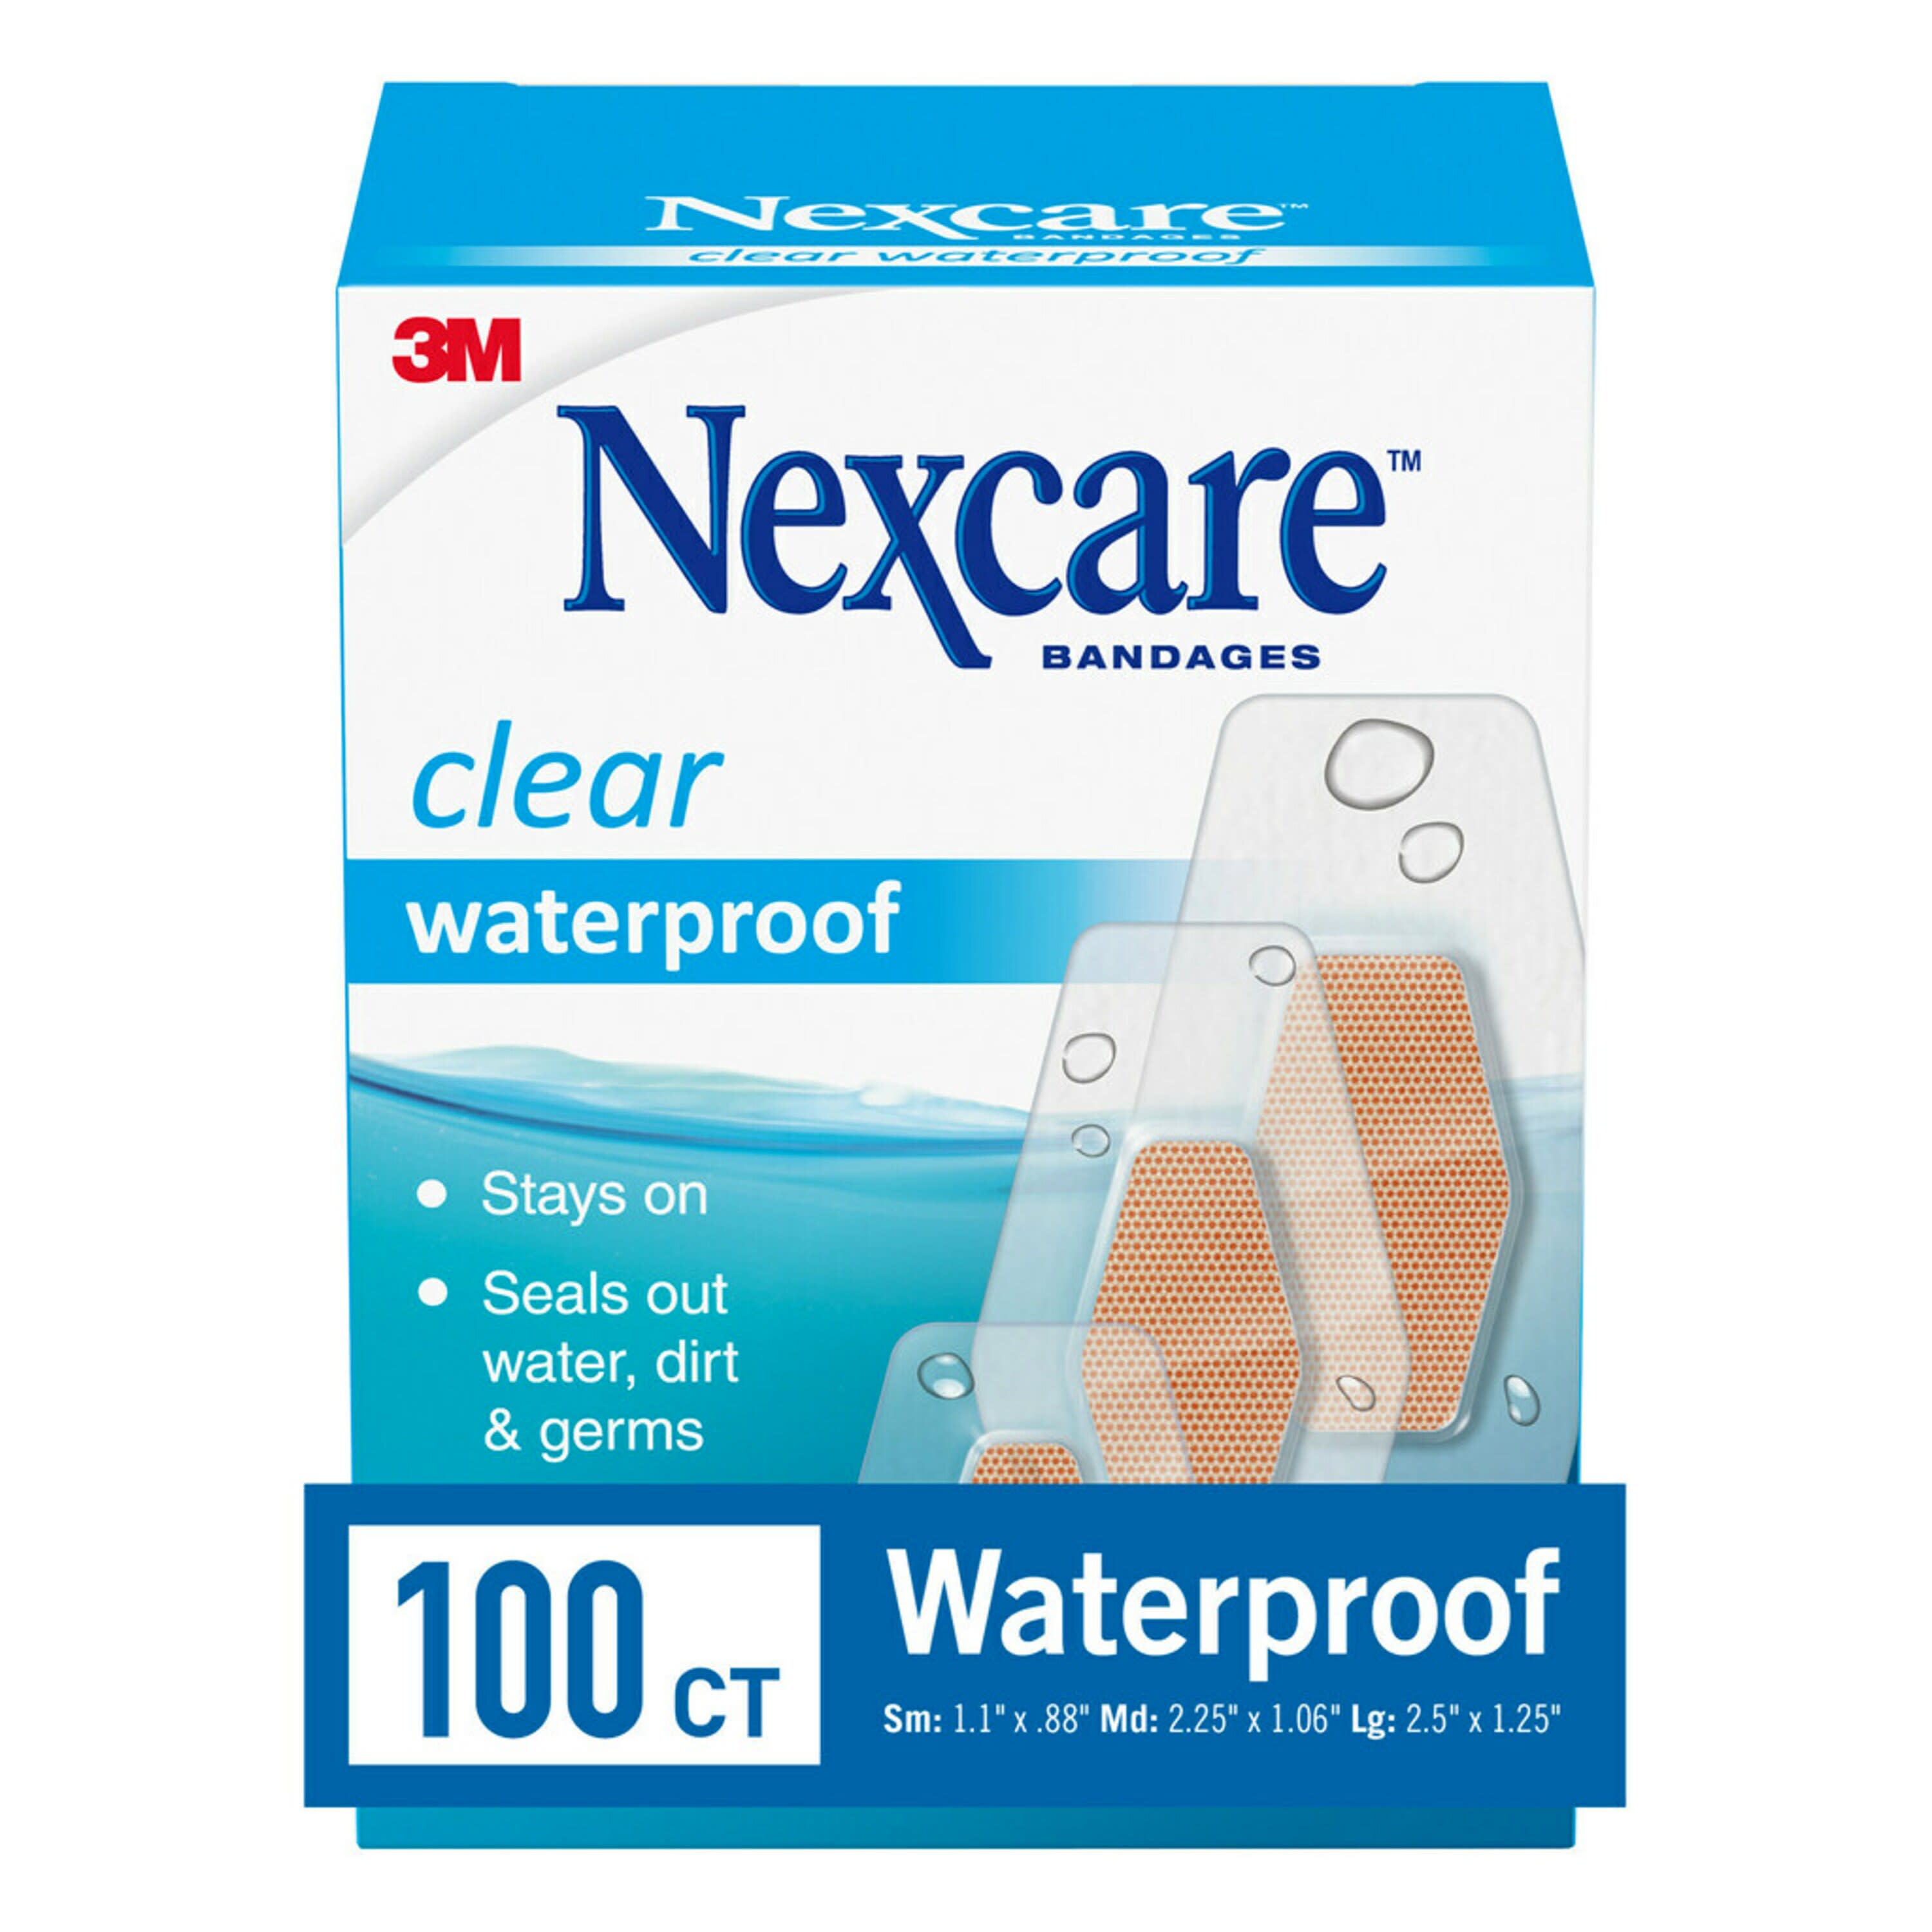 Nexcare Waterproof Bandages - Pack of 100 Bandages - image 3 of 17